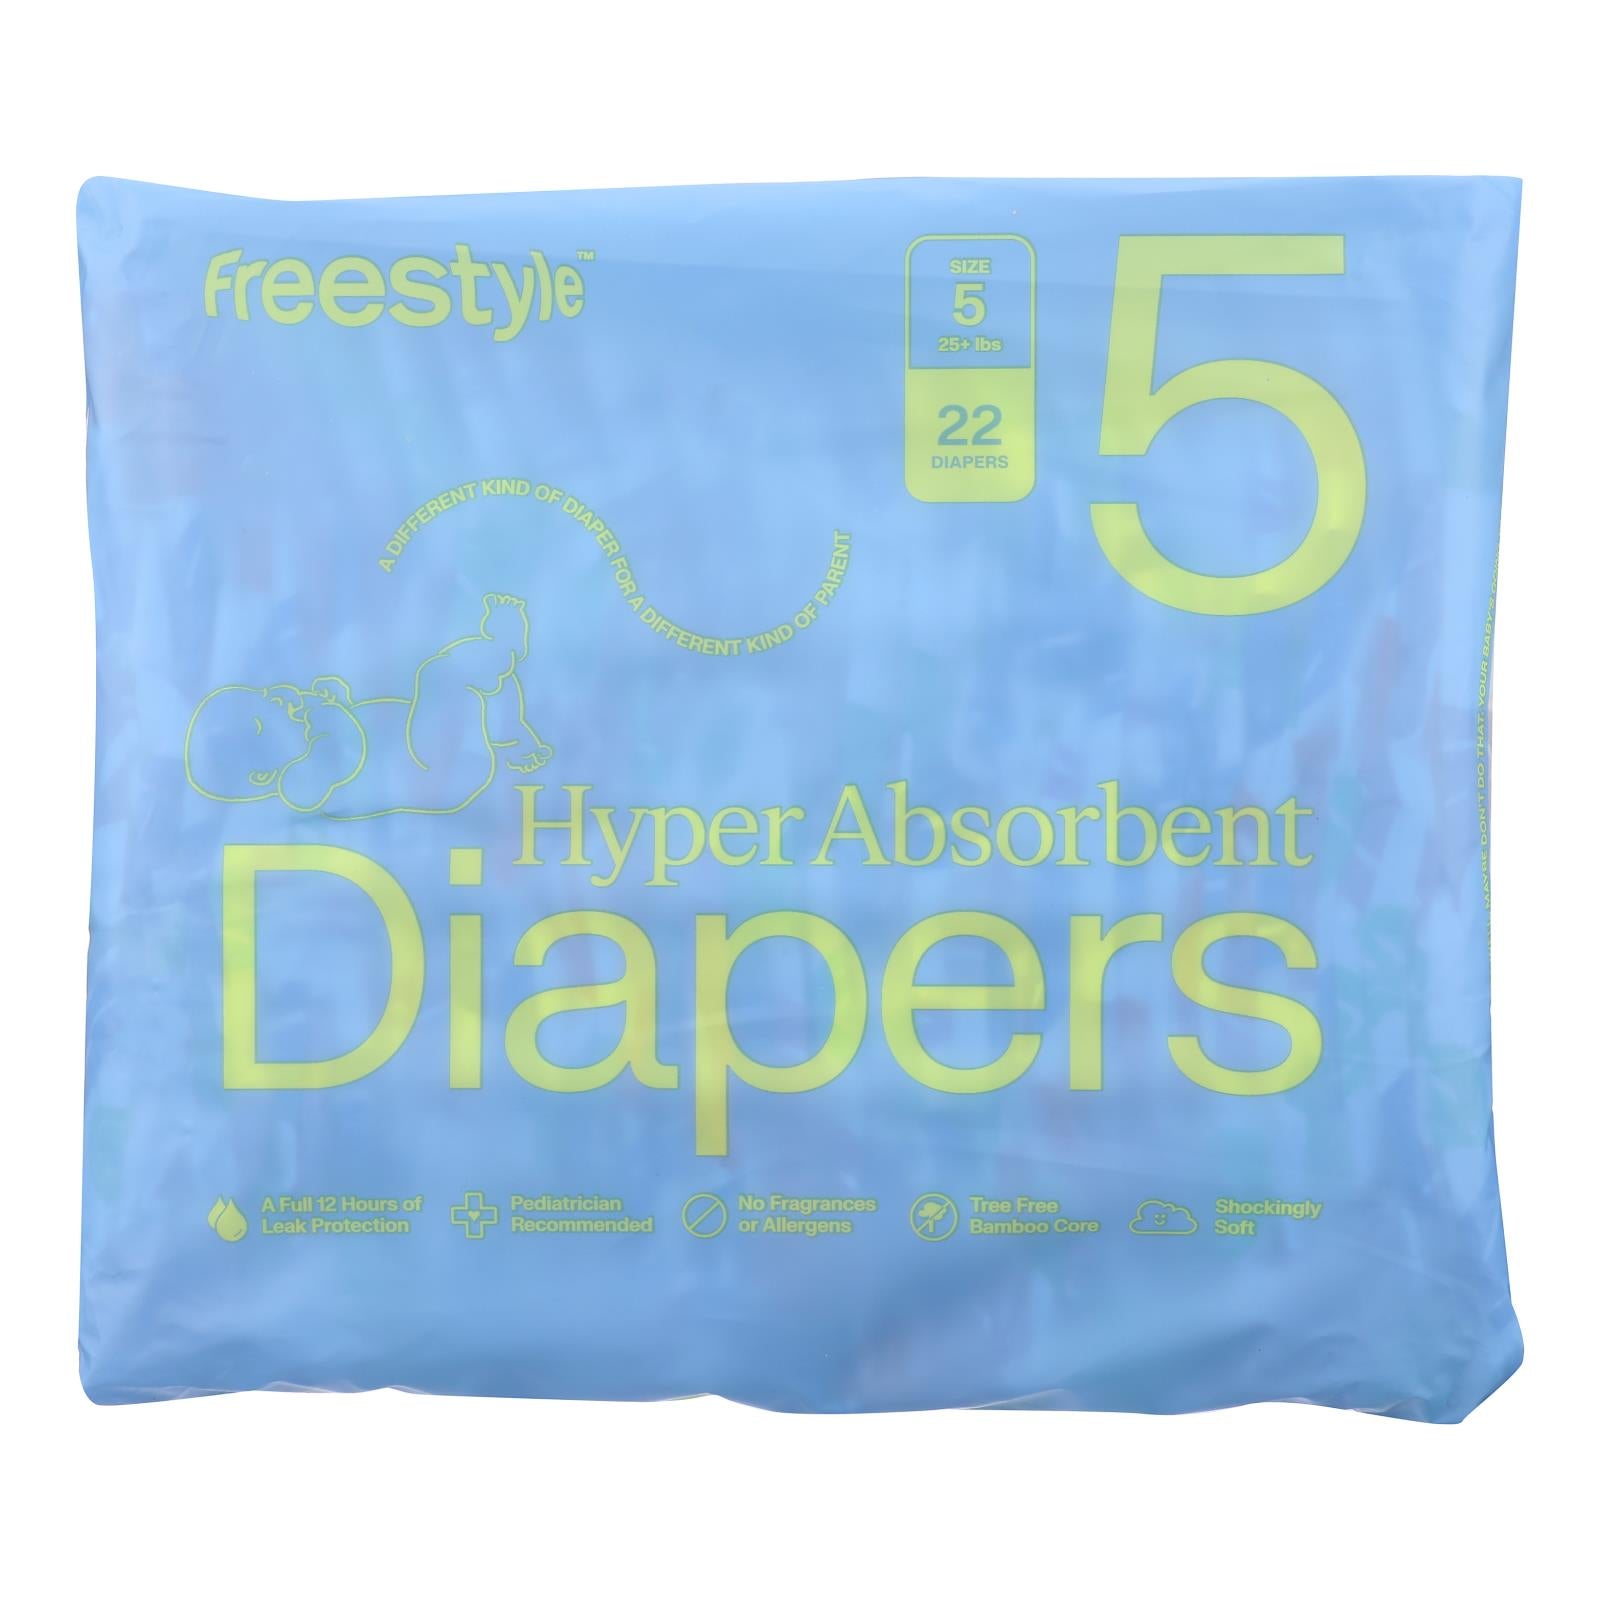 Freestyle - Diapers Baby Size 5 - Case of 6-22 CT